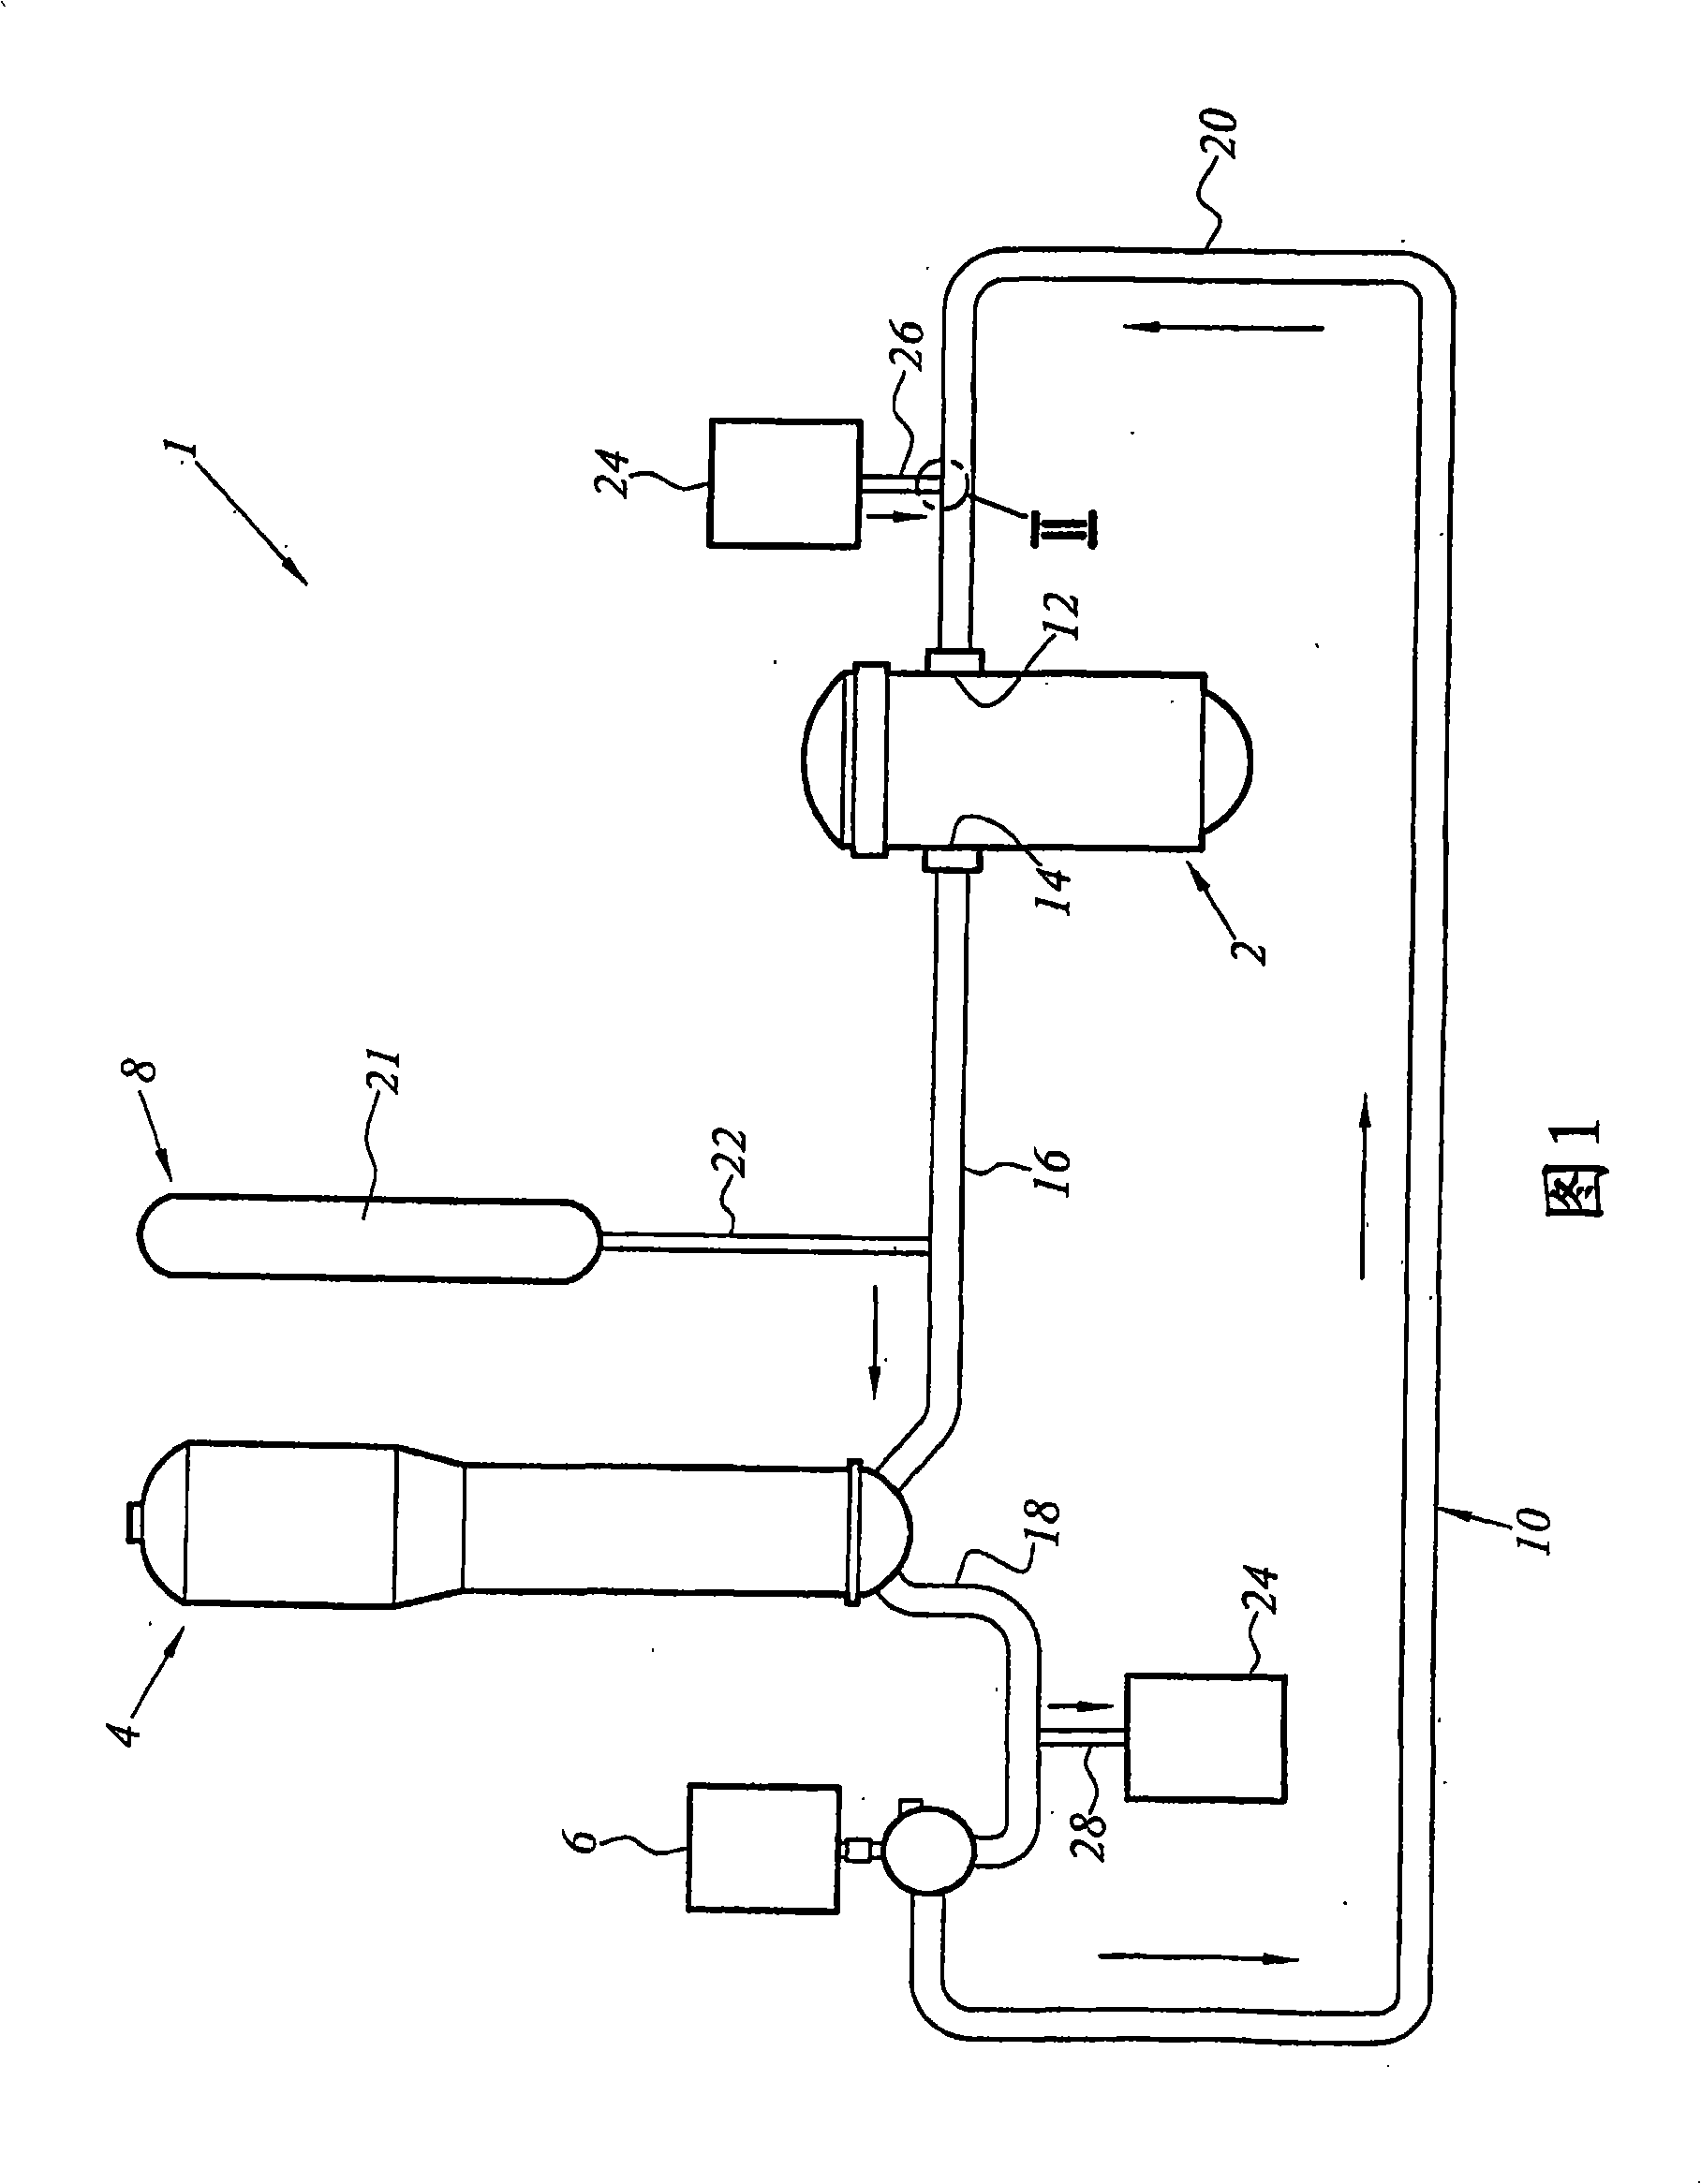 Nuclear reactor primary circuit